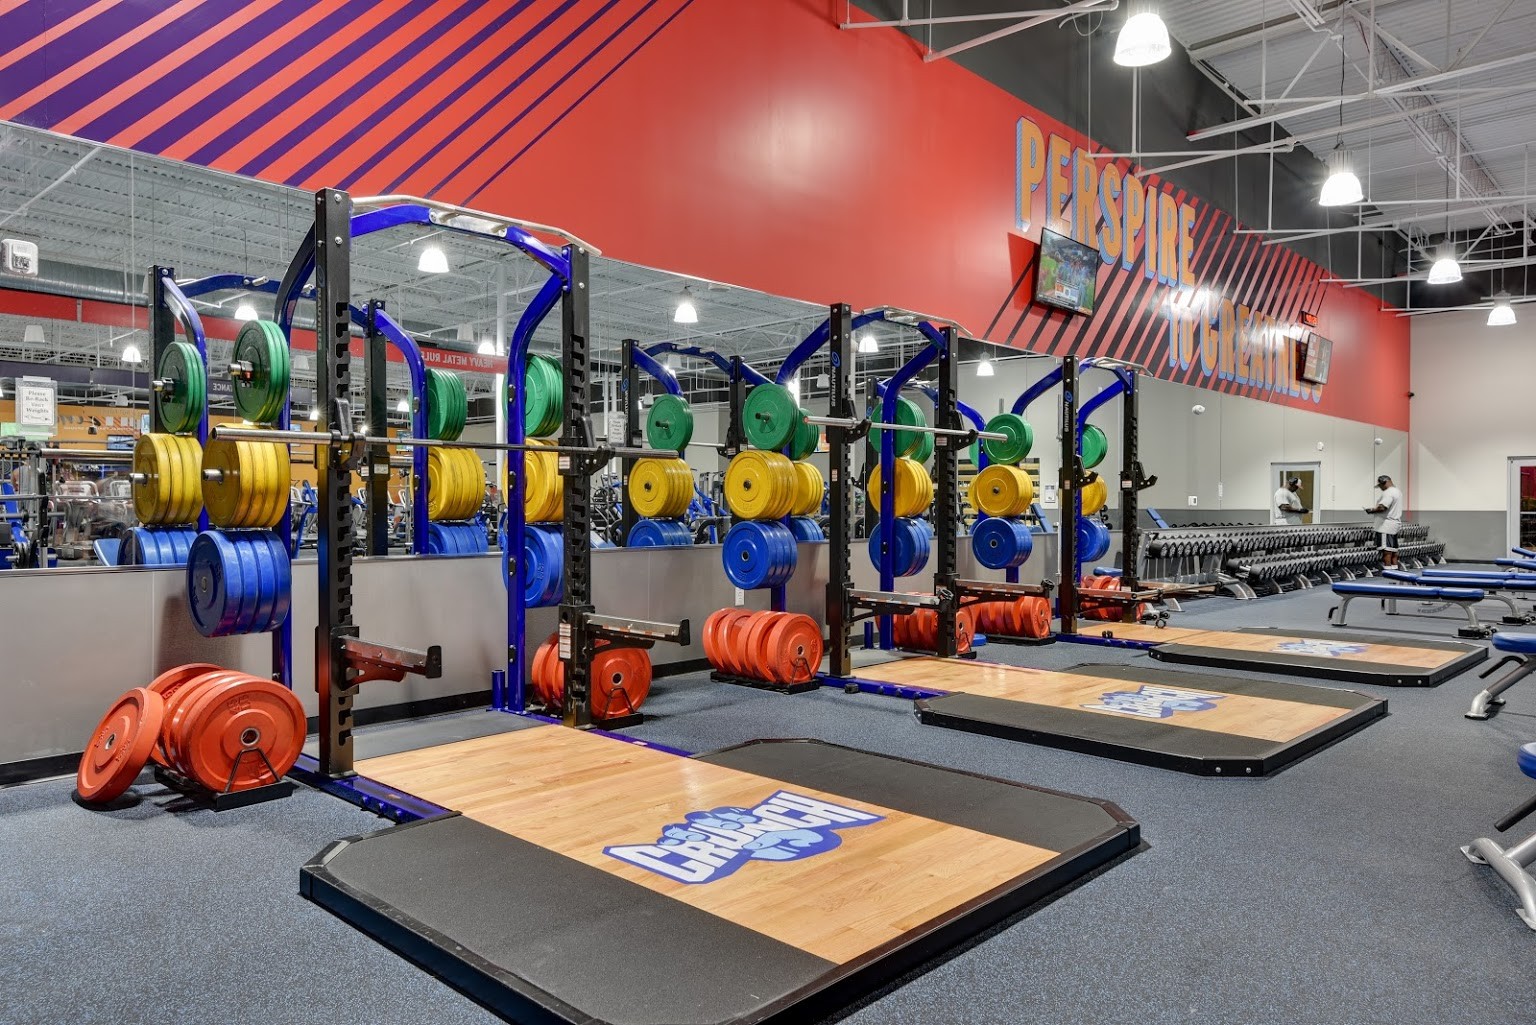 Crunch Fitness gym in Raleigh, NC – Google Business View, Interactive Tour